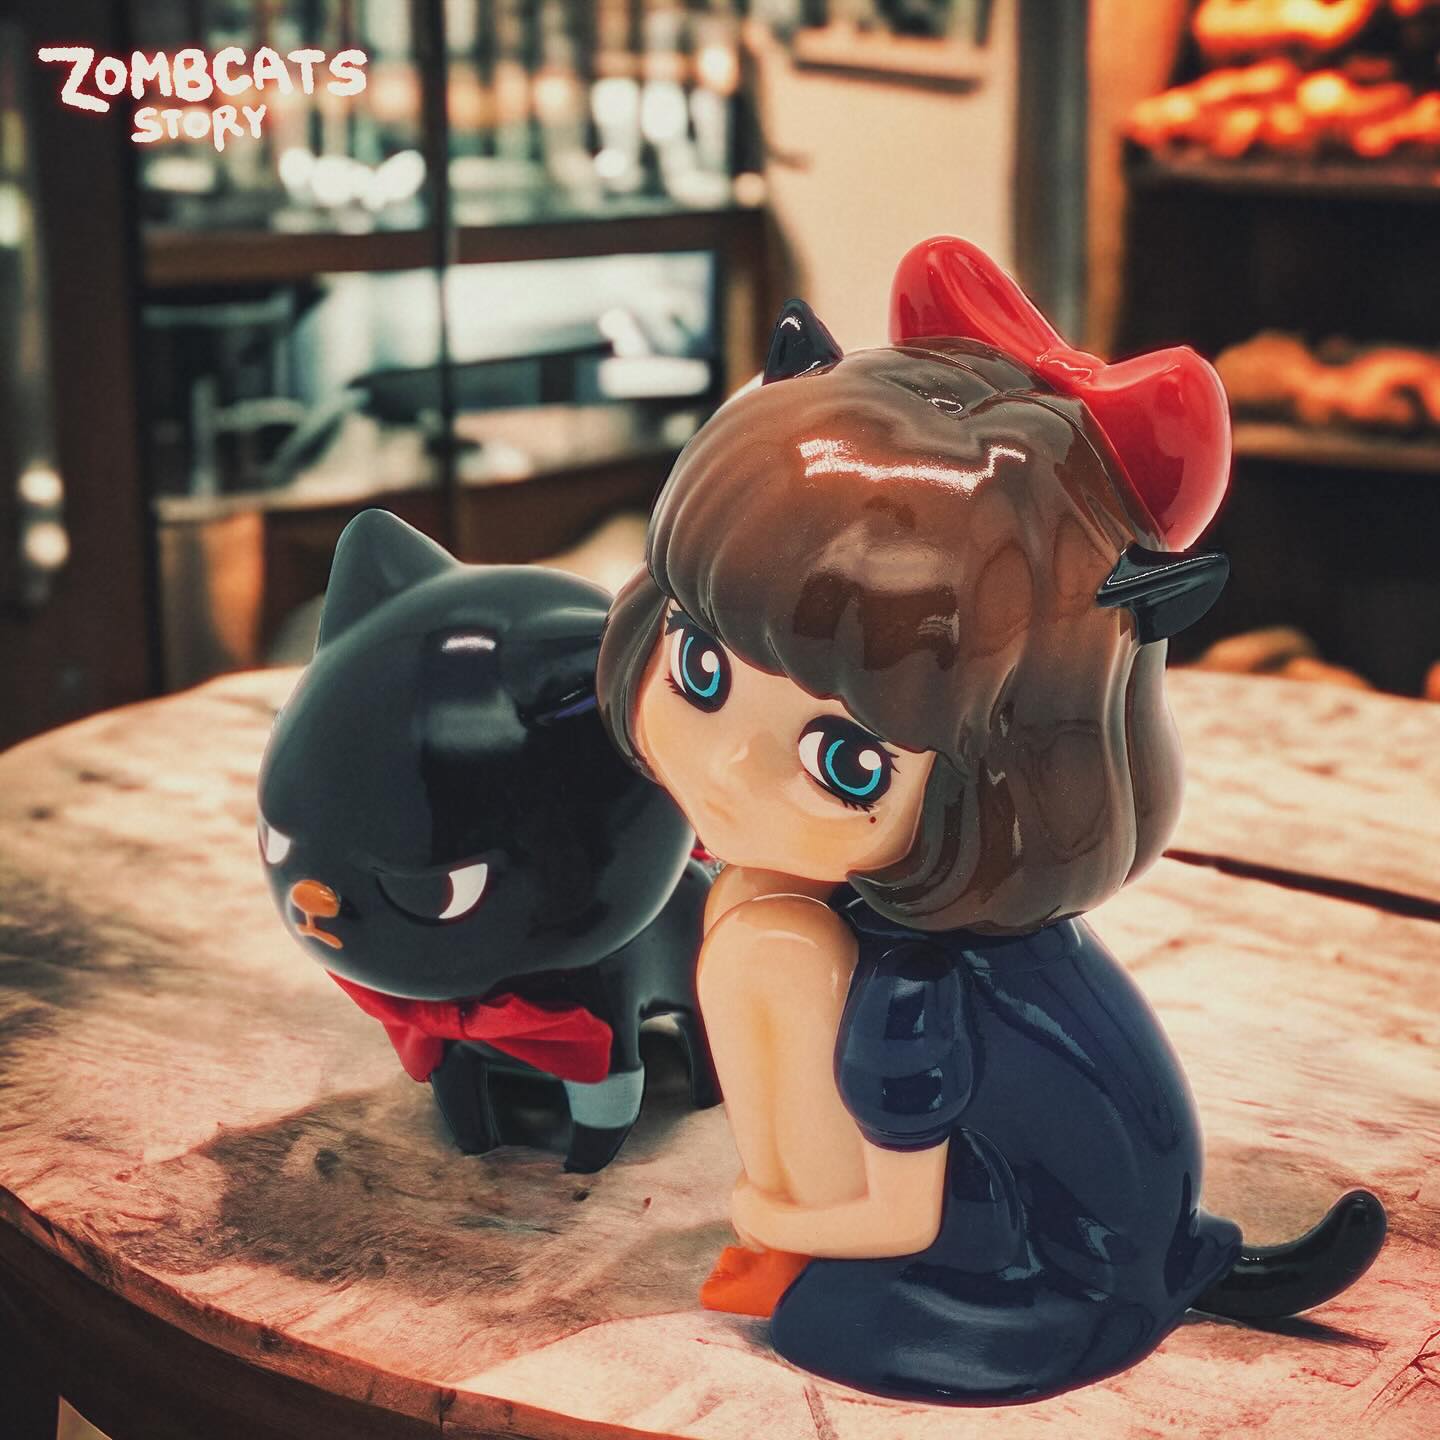 Nekomume figurine with girl, cat, and doll in limited edition vinyl toy set by Morimei.